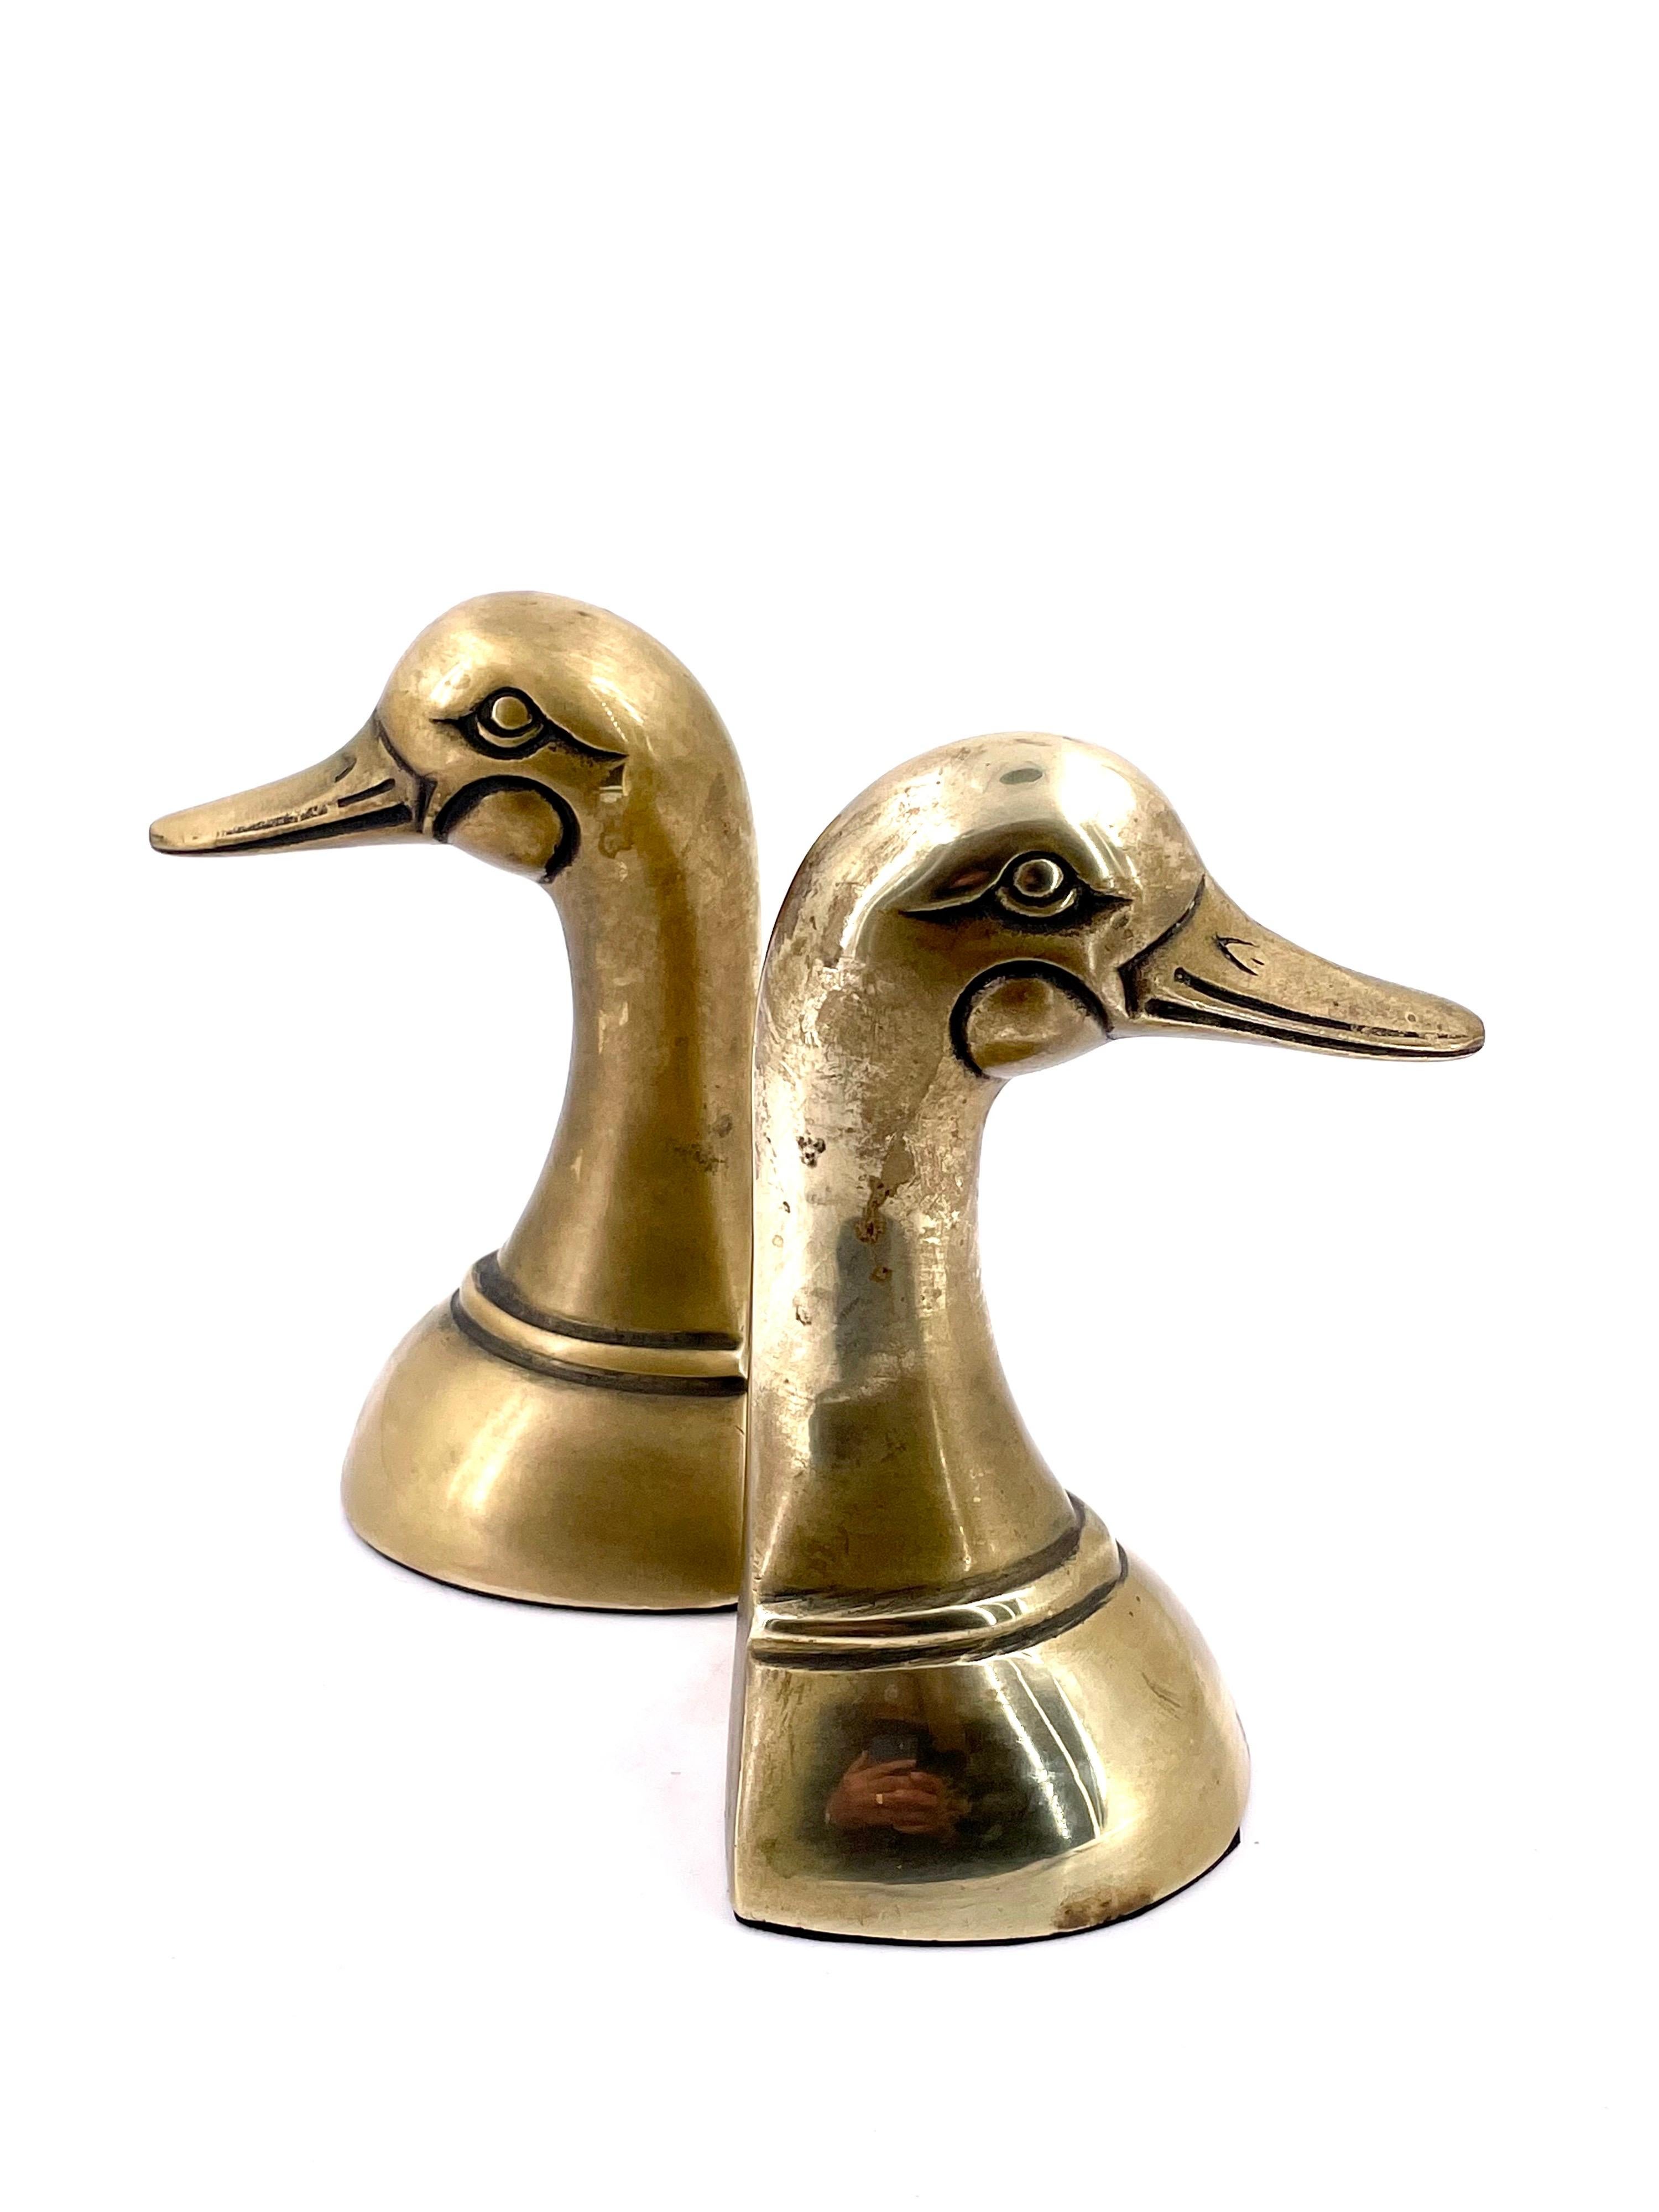 Nicely light polished brass bookends, duck heads, circa 1970s.